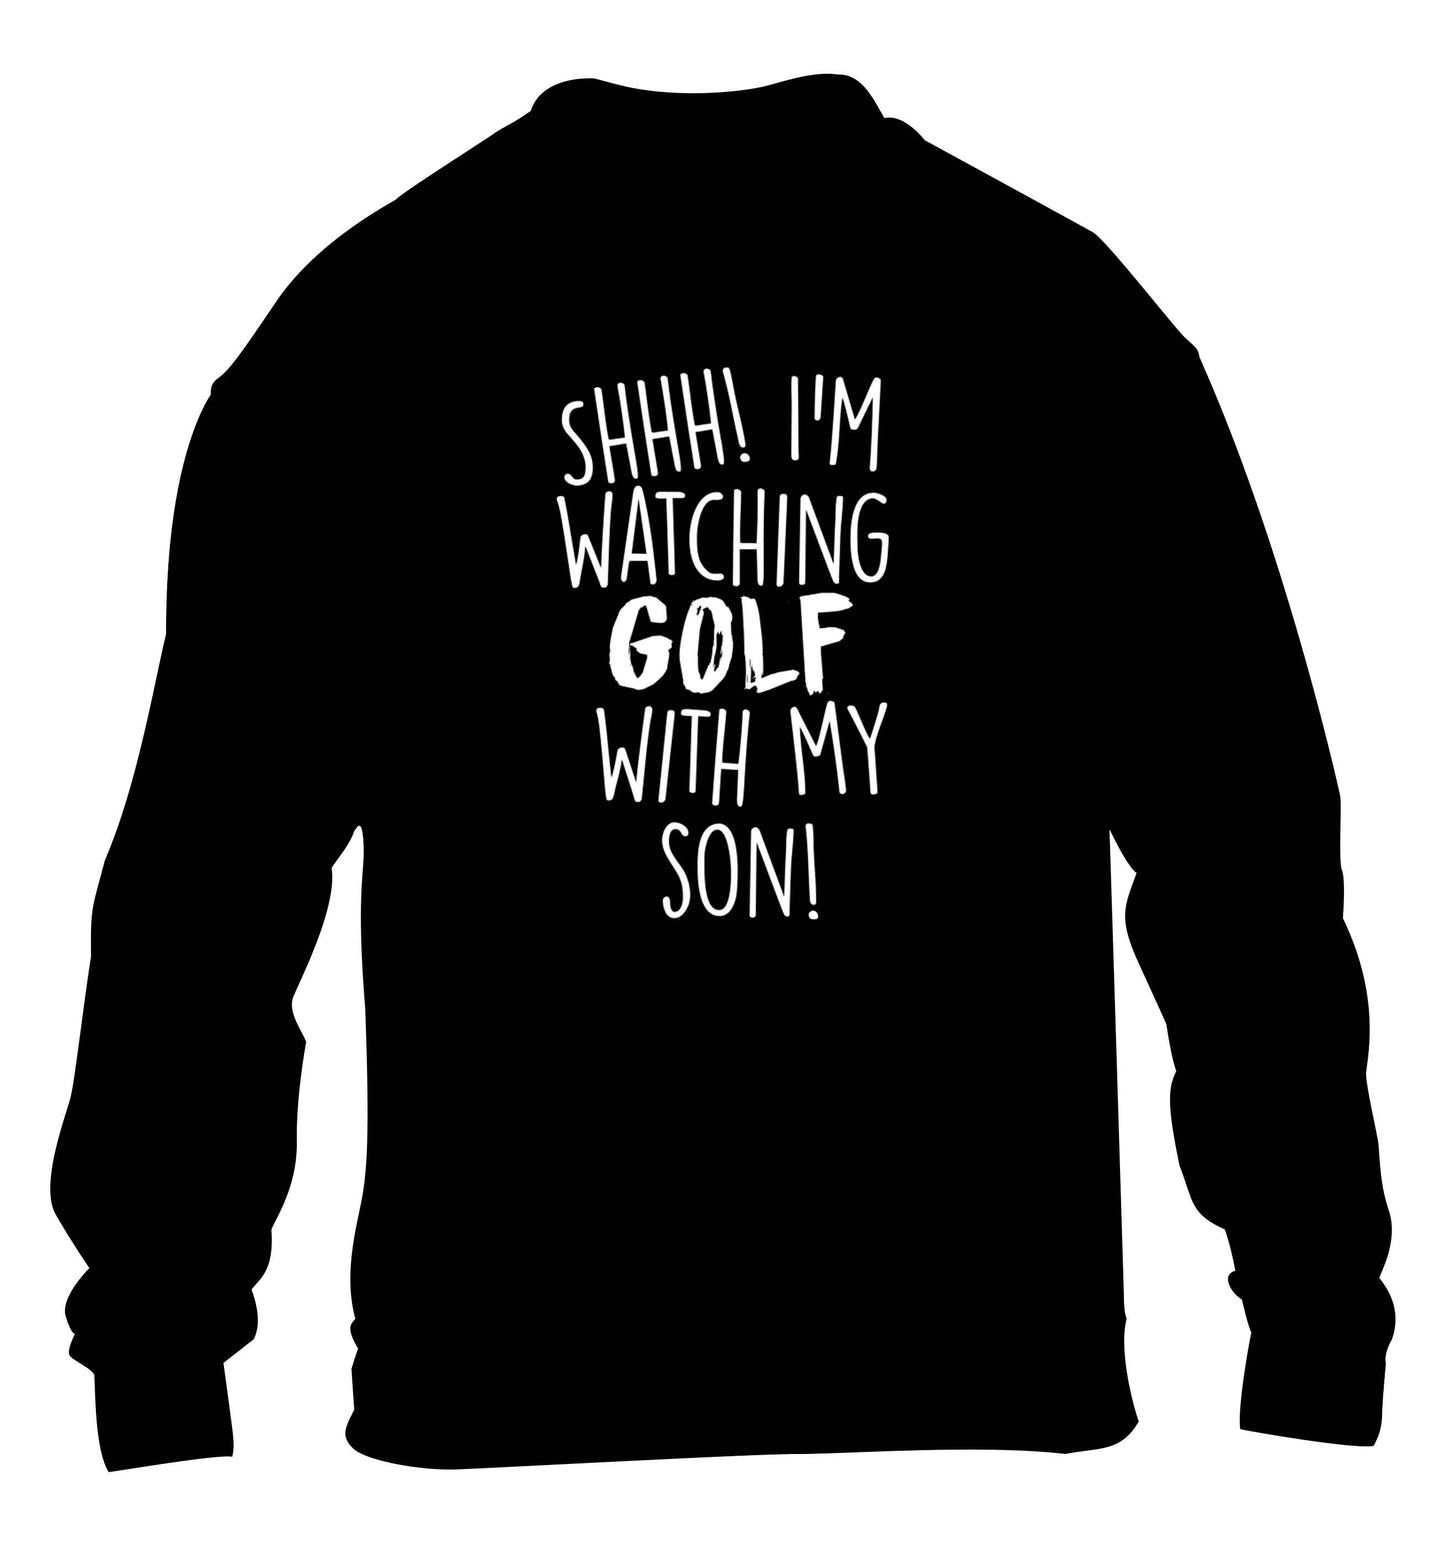 Shh I'm watching golf with my son children's black sweater 12-13 Years